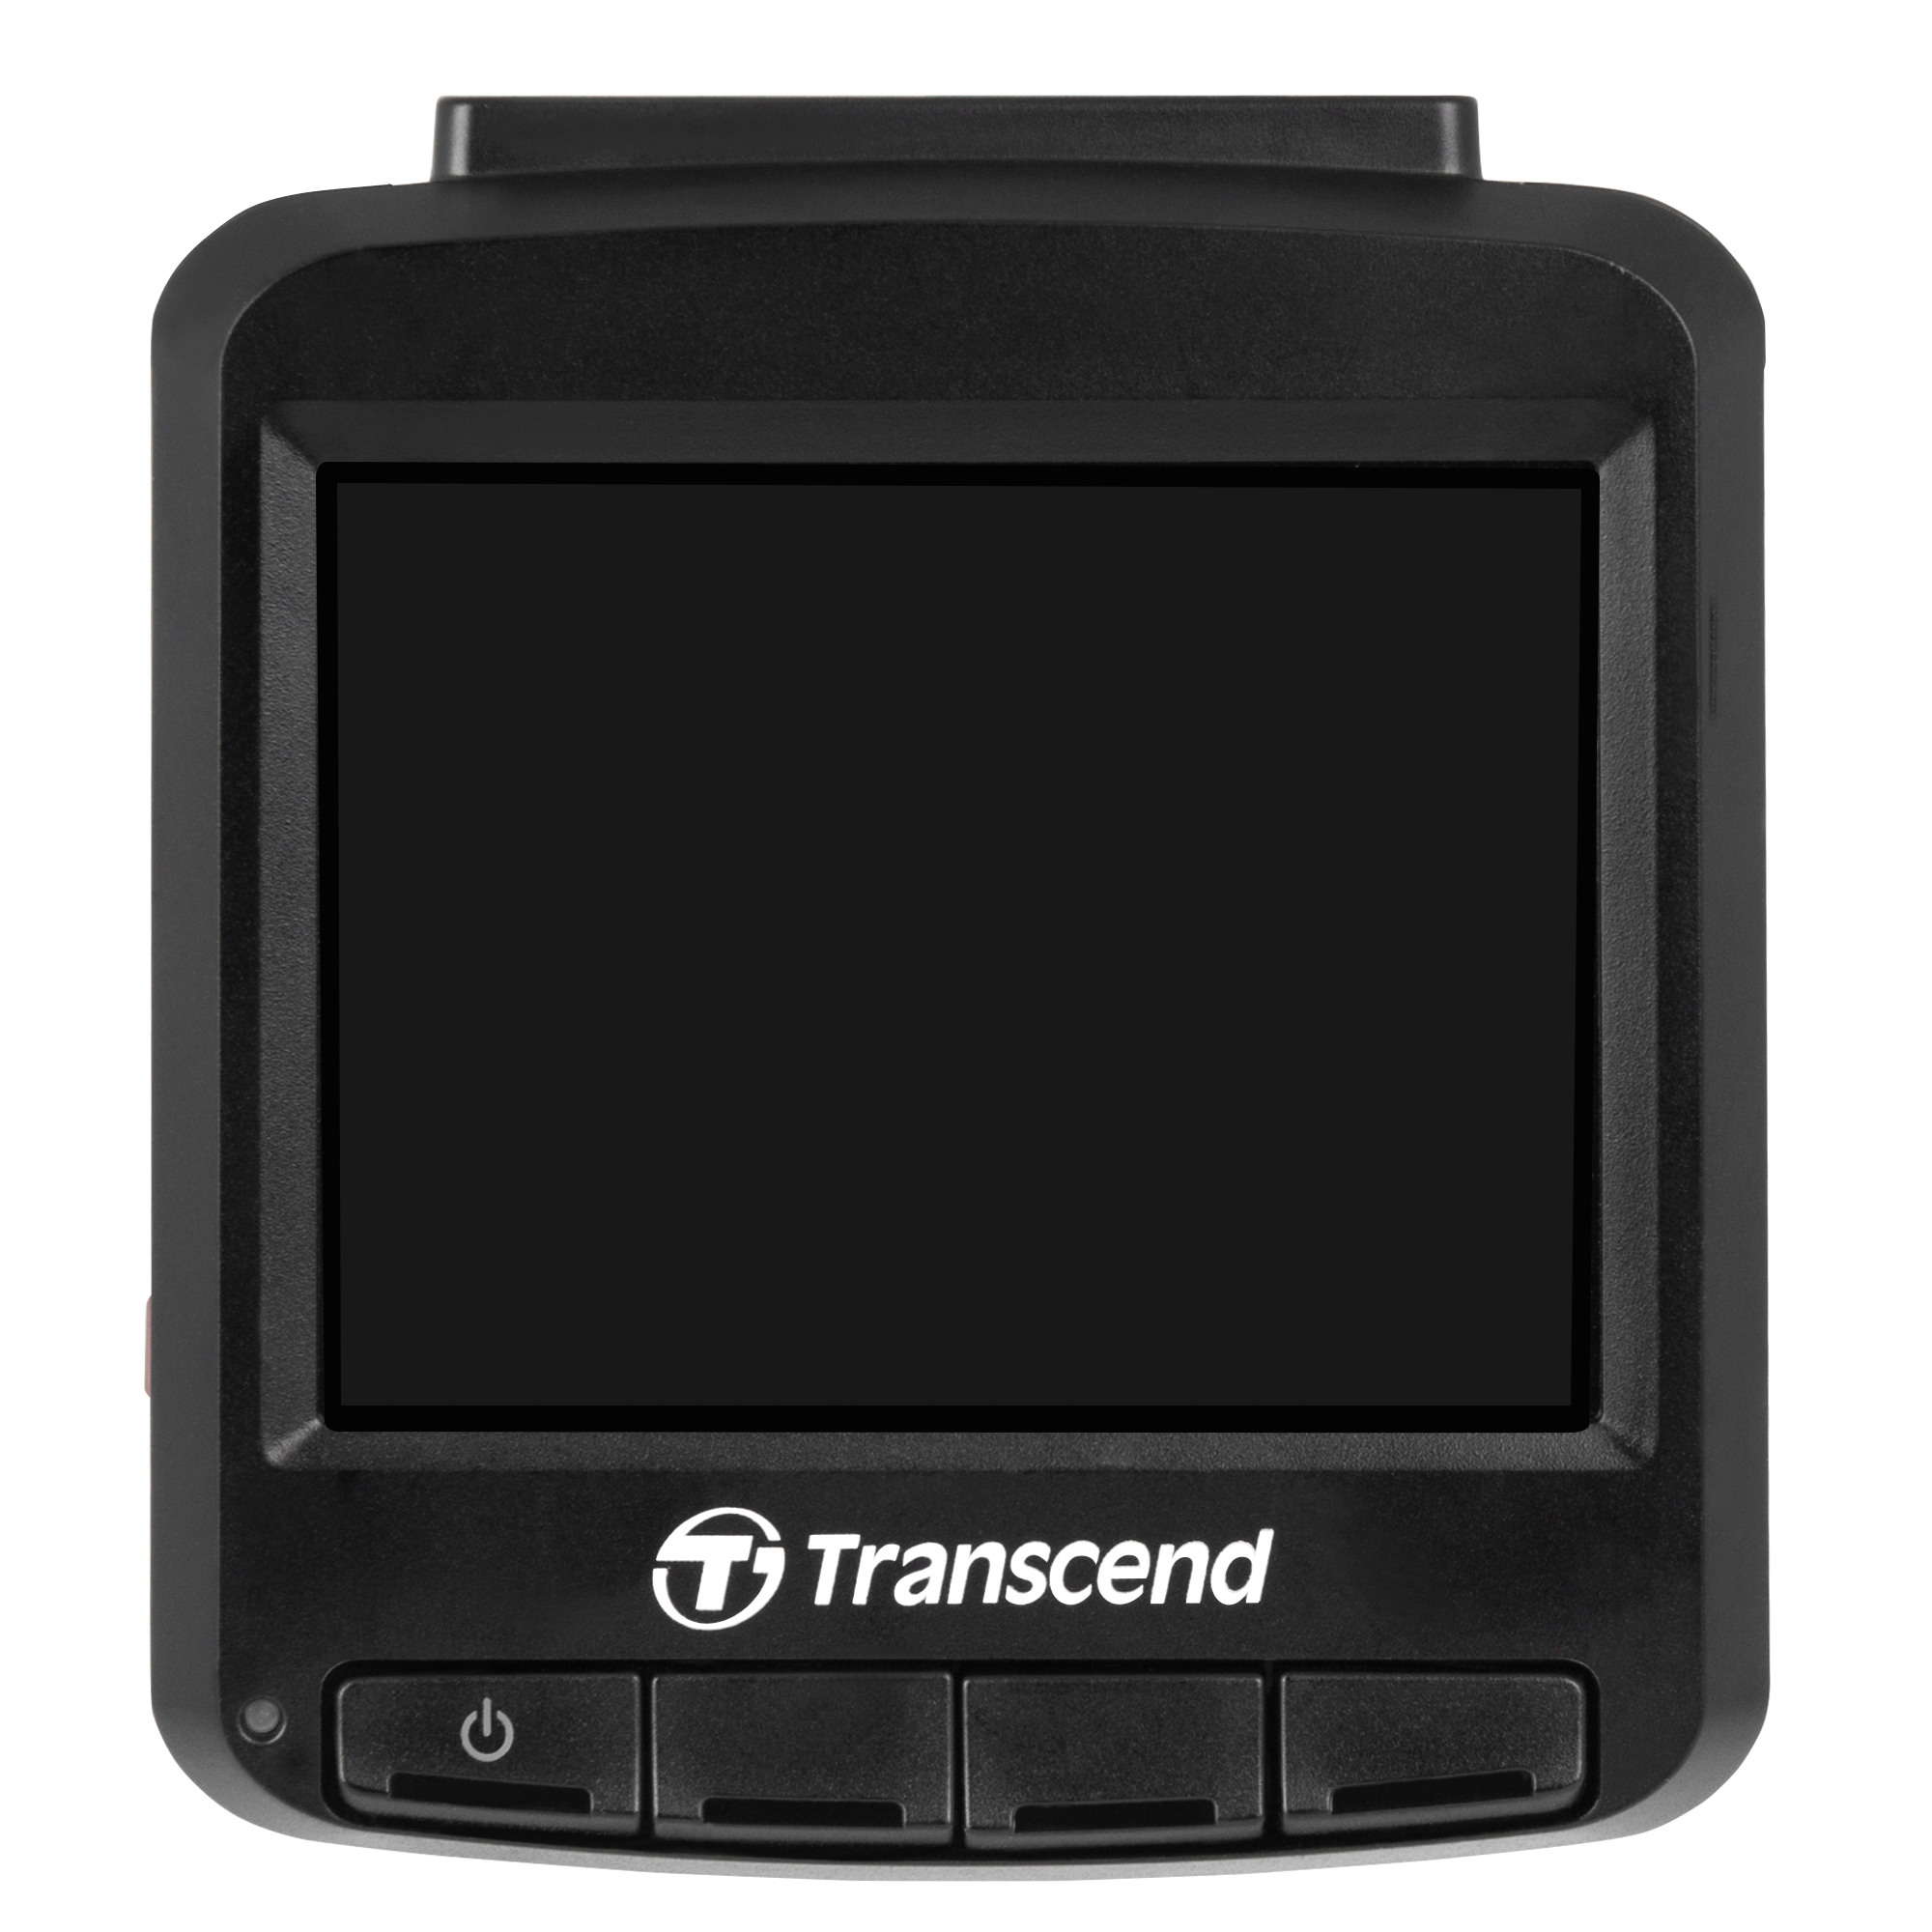 TRANSCEND DrivePro 110 32GB Full HD TS-DP110M-32 CarVideoRecorder (Suct.Mount)